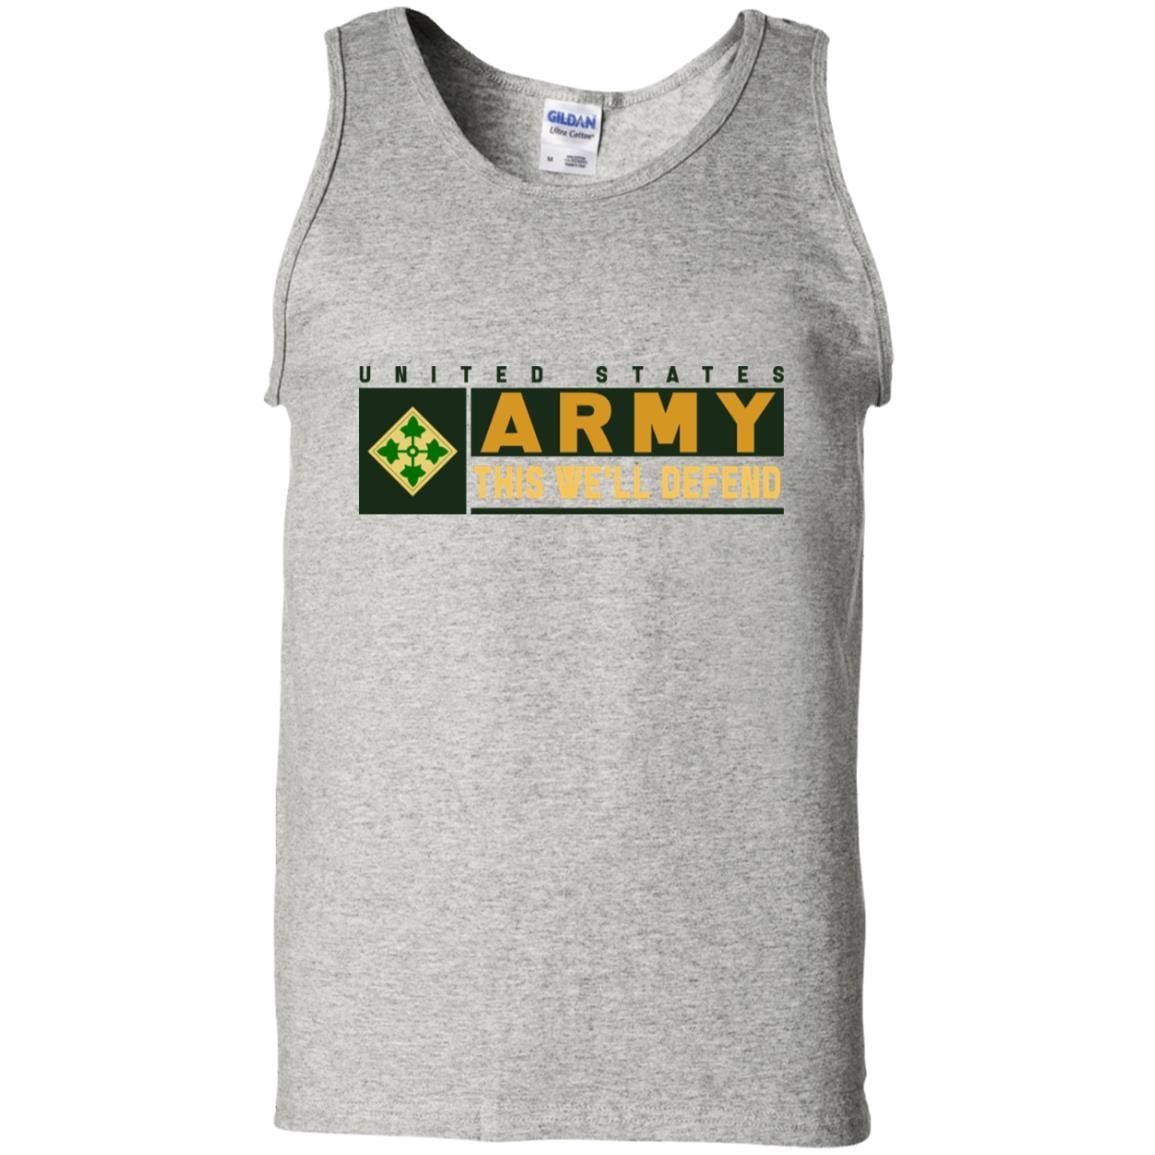 US Army 4th Infantry Division- This We'll Defend T-Shirt On Front For Men-TShirt-Army-Veterans Nation